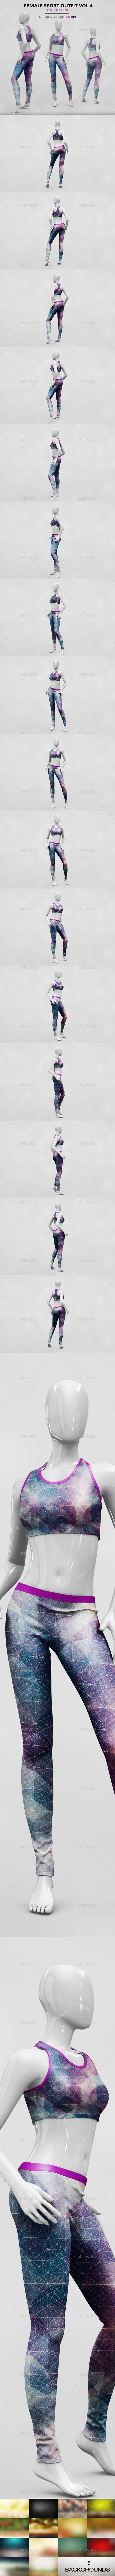 Female Sport Outfit VOL.4 MockUp